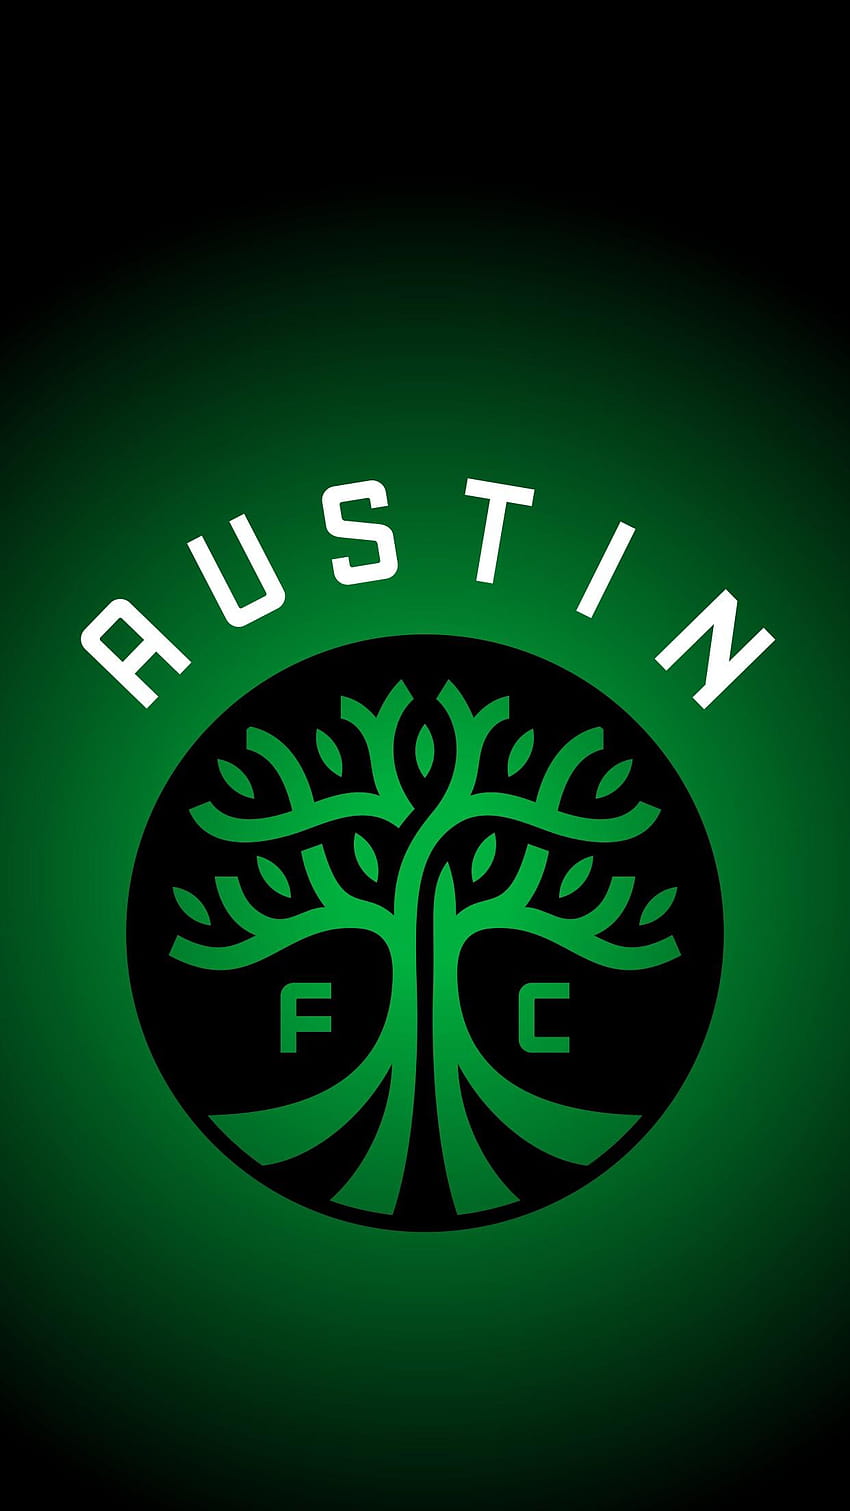 Talk Austin Fc   BREAKING We really want Austin FC to sign Messi also  you got really excited for a second didnt ya  mls austinfc austin  atx Messi Barcelona  Facebook